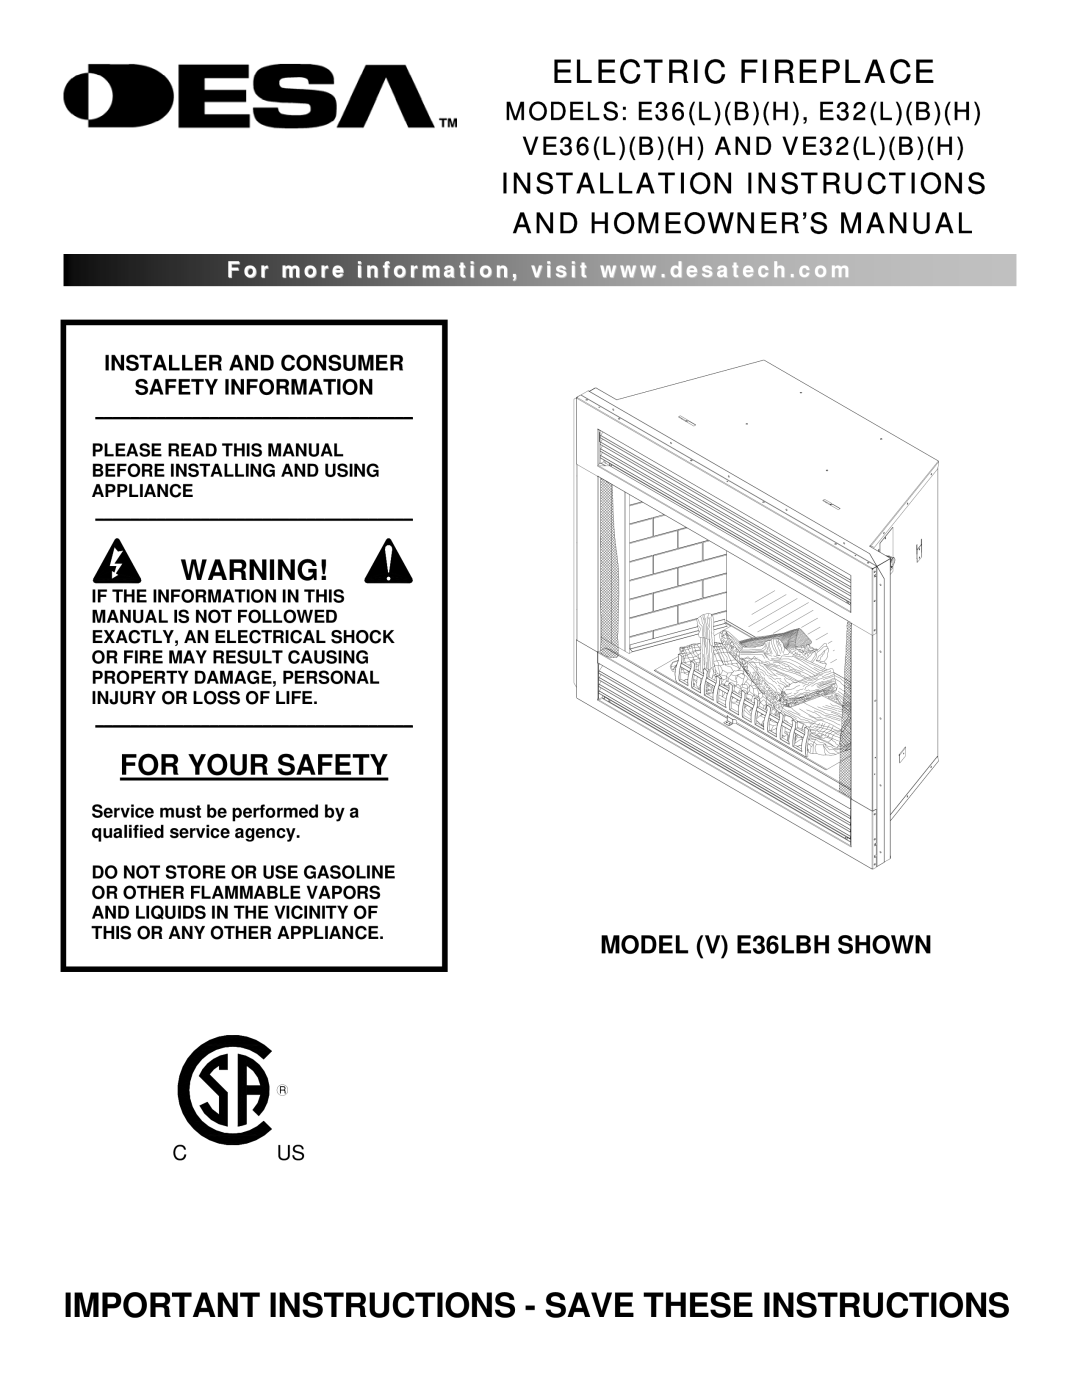 Desa E36(L)(B)(H) installation instructions Electric Fireplace, For Your Safety, MODELS E36LBH, E32LBH VE36LBH AND VE32LBH 